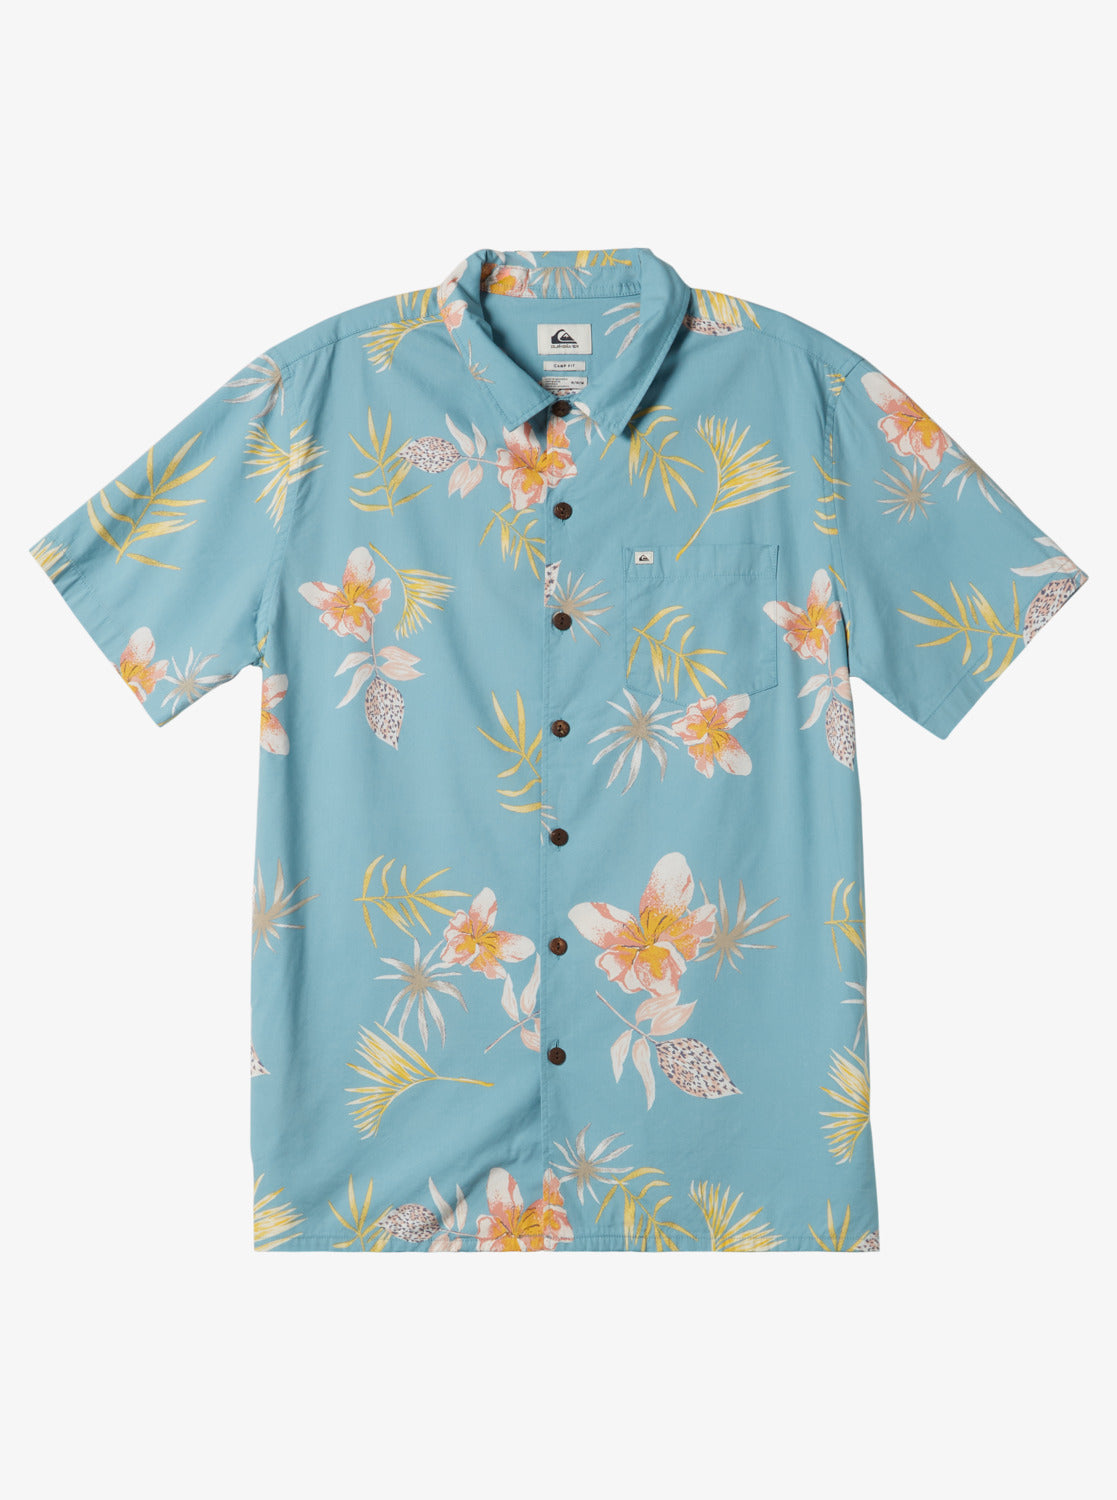 Tropical Floral Short Sleeve Woven Shirt - Reef Waters Tropical Floral